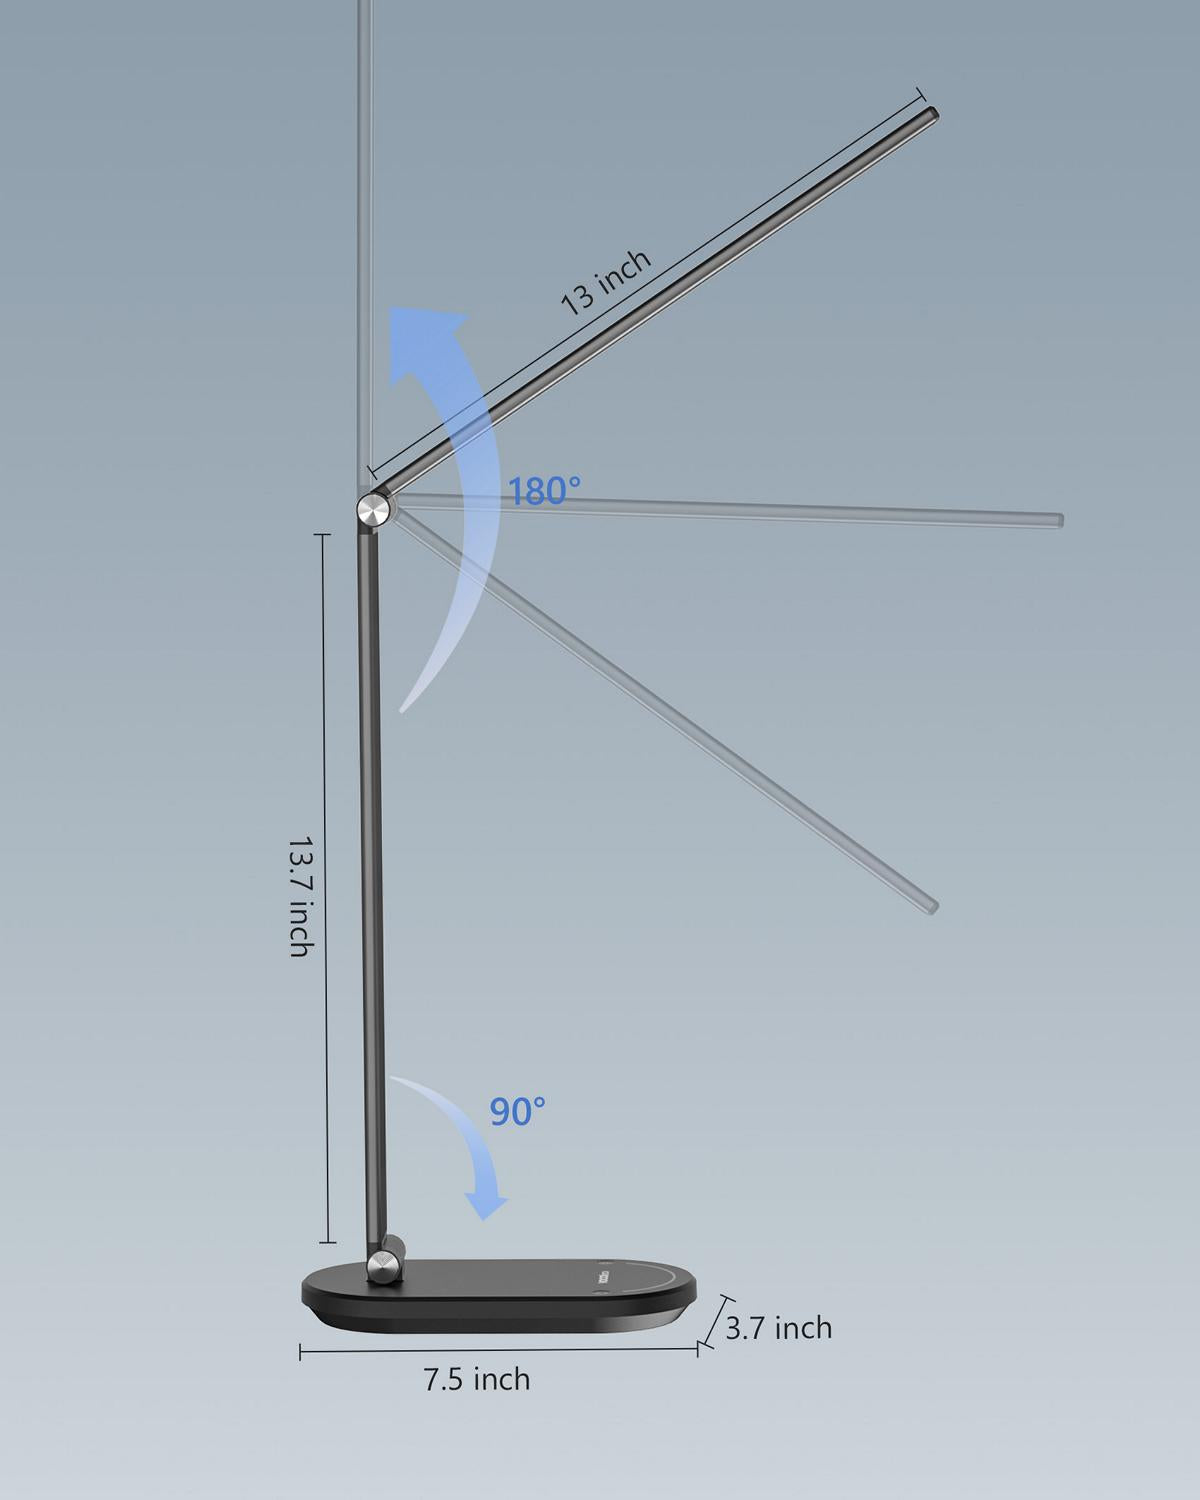 Foldable Portable Design: LED desk lamp with 180° flexible arm and 90° base axis. The foldable design makes it easy to carry and place, providing the ideal level of lighting for work, study and reading. The lamp has a lifespan of 25,000 hours without bulb